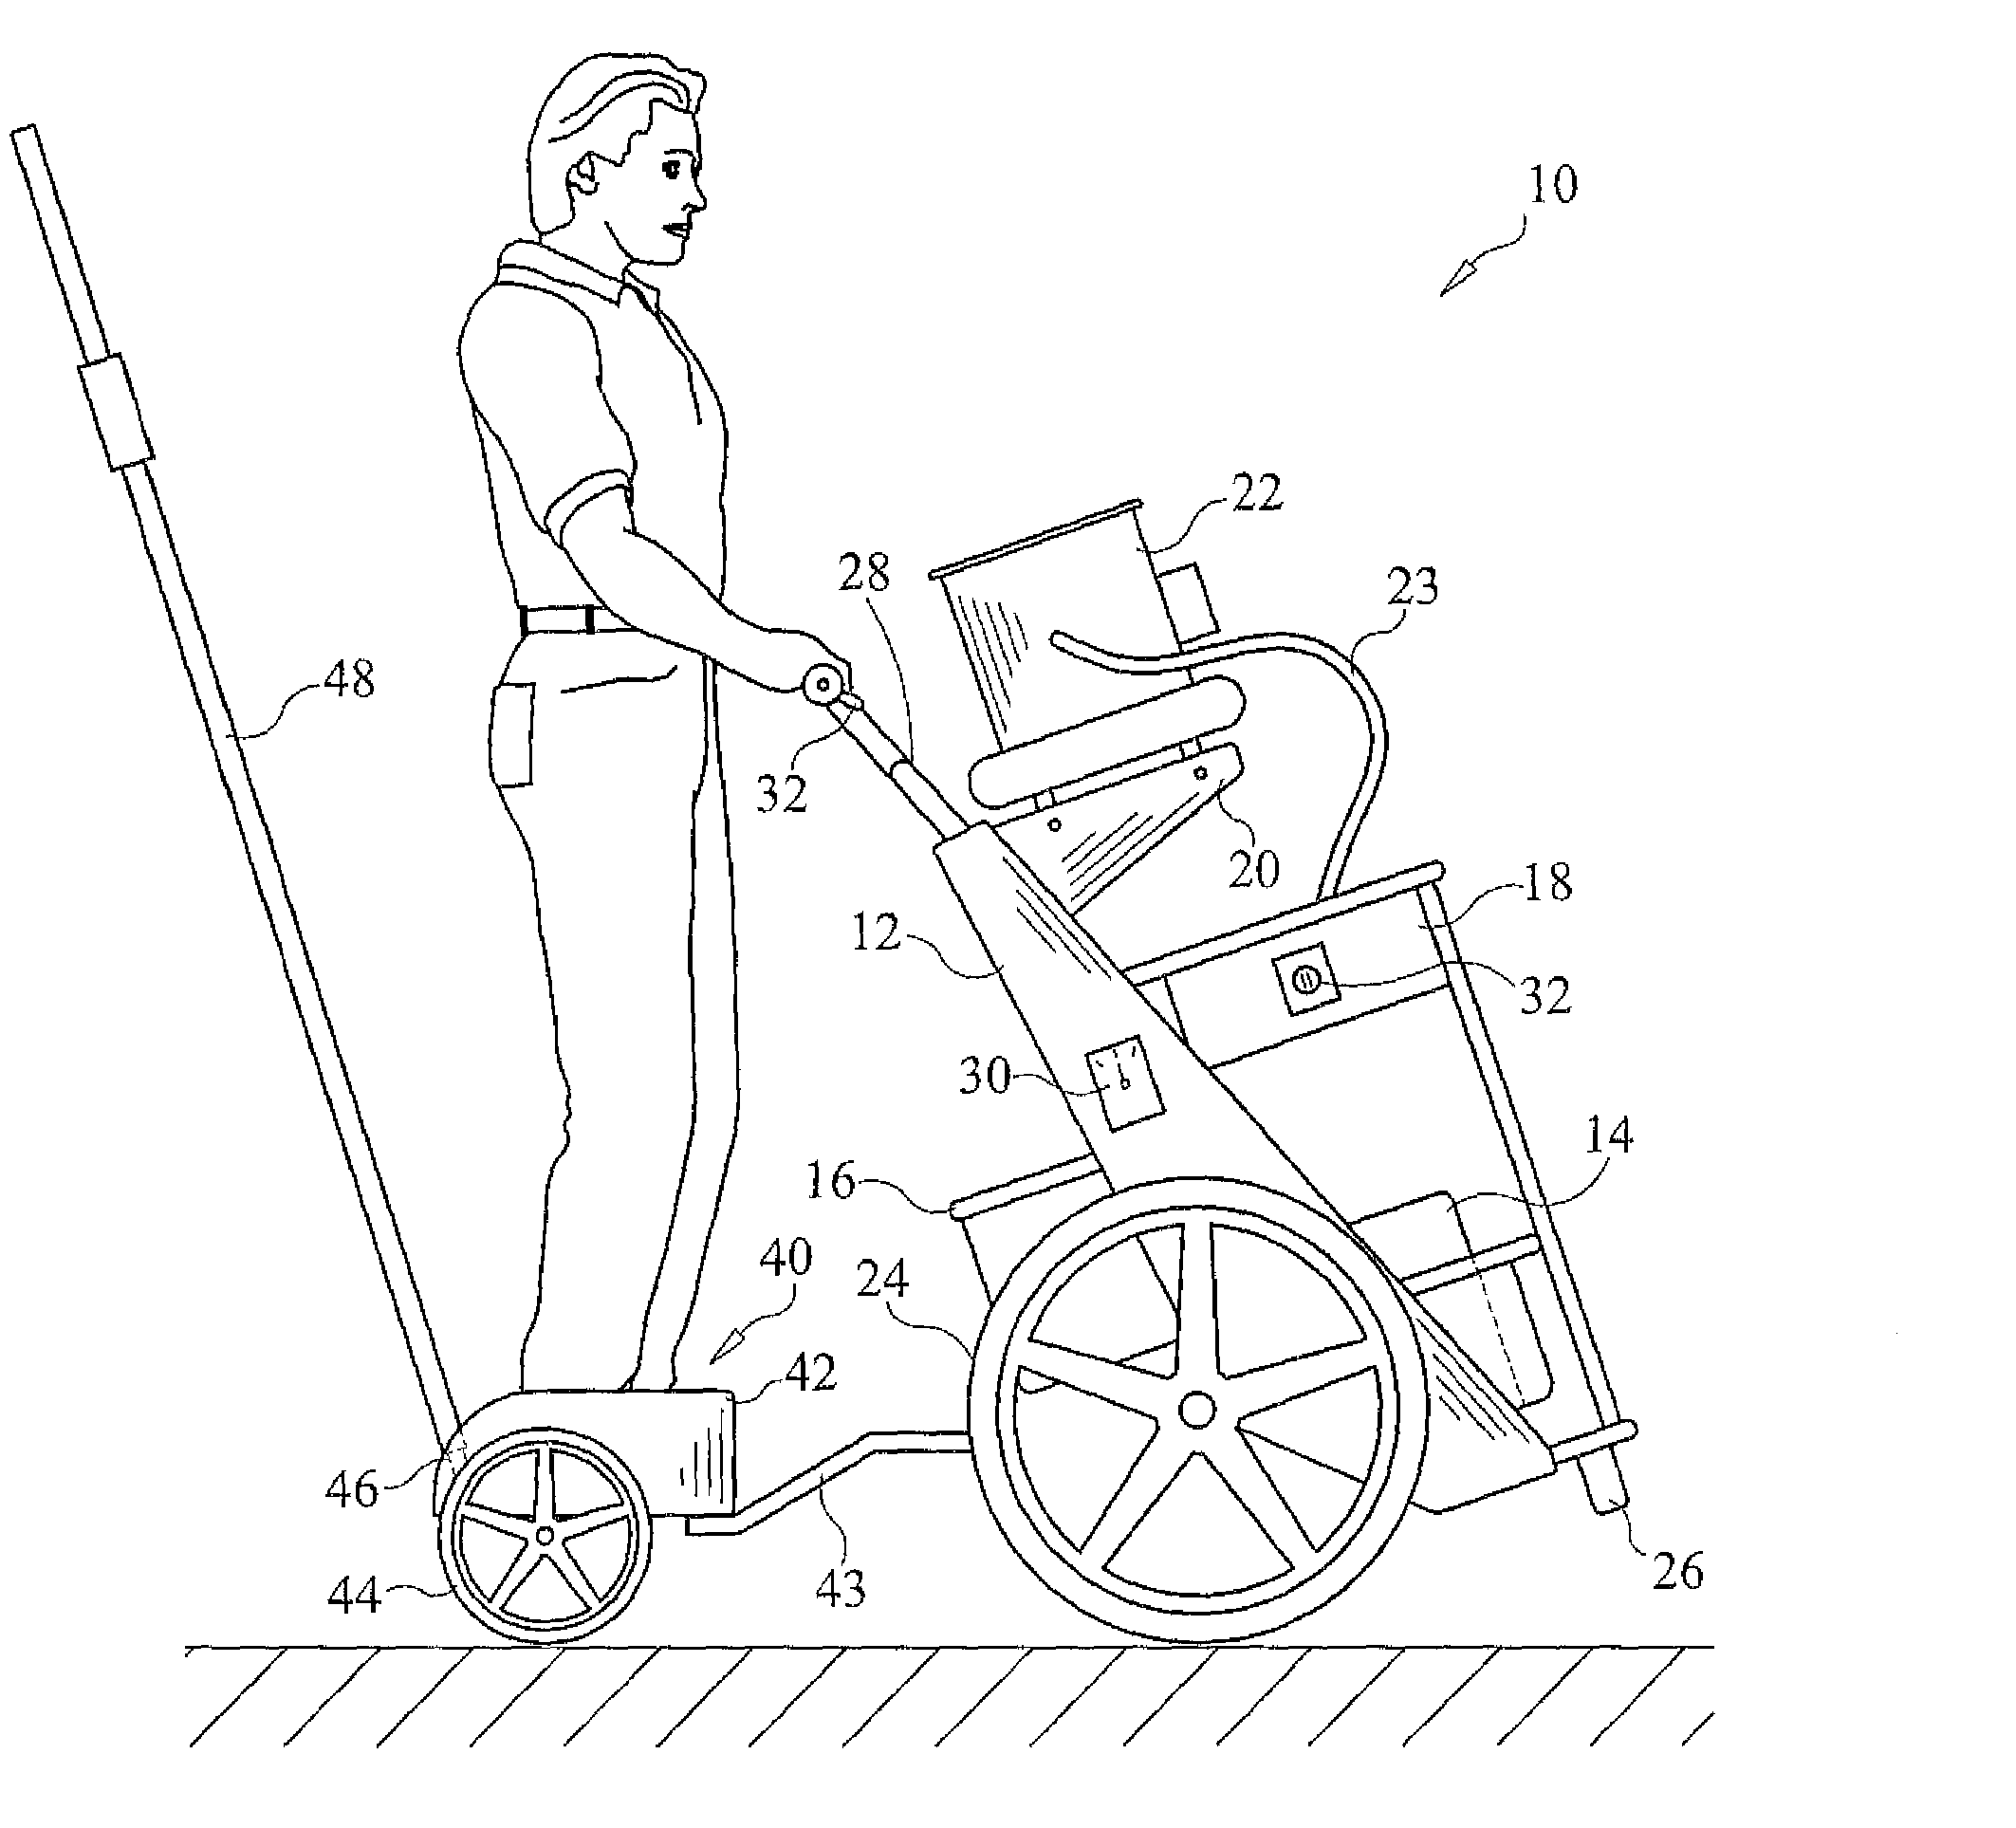 Self-propelled pool service cart with sulky